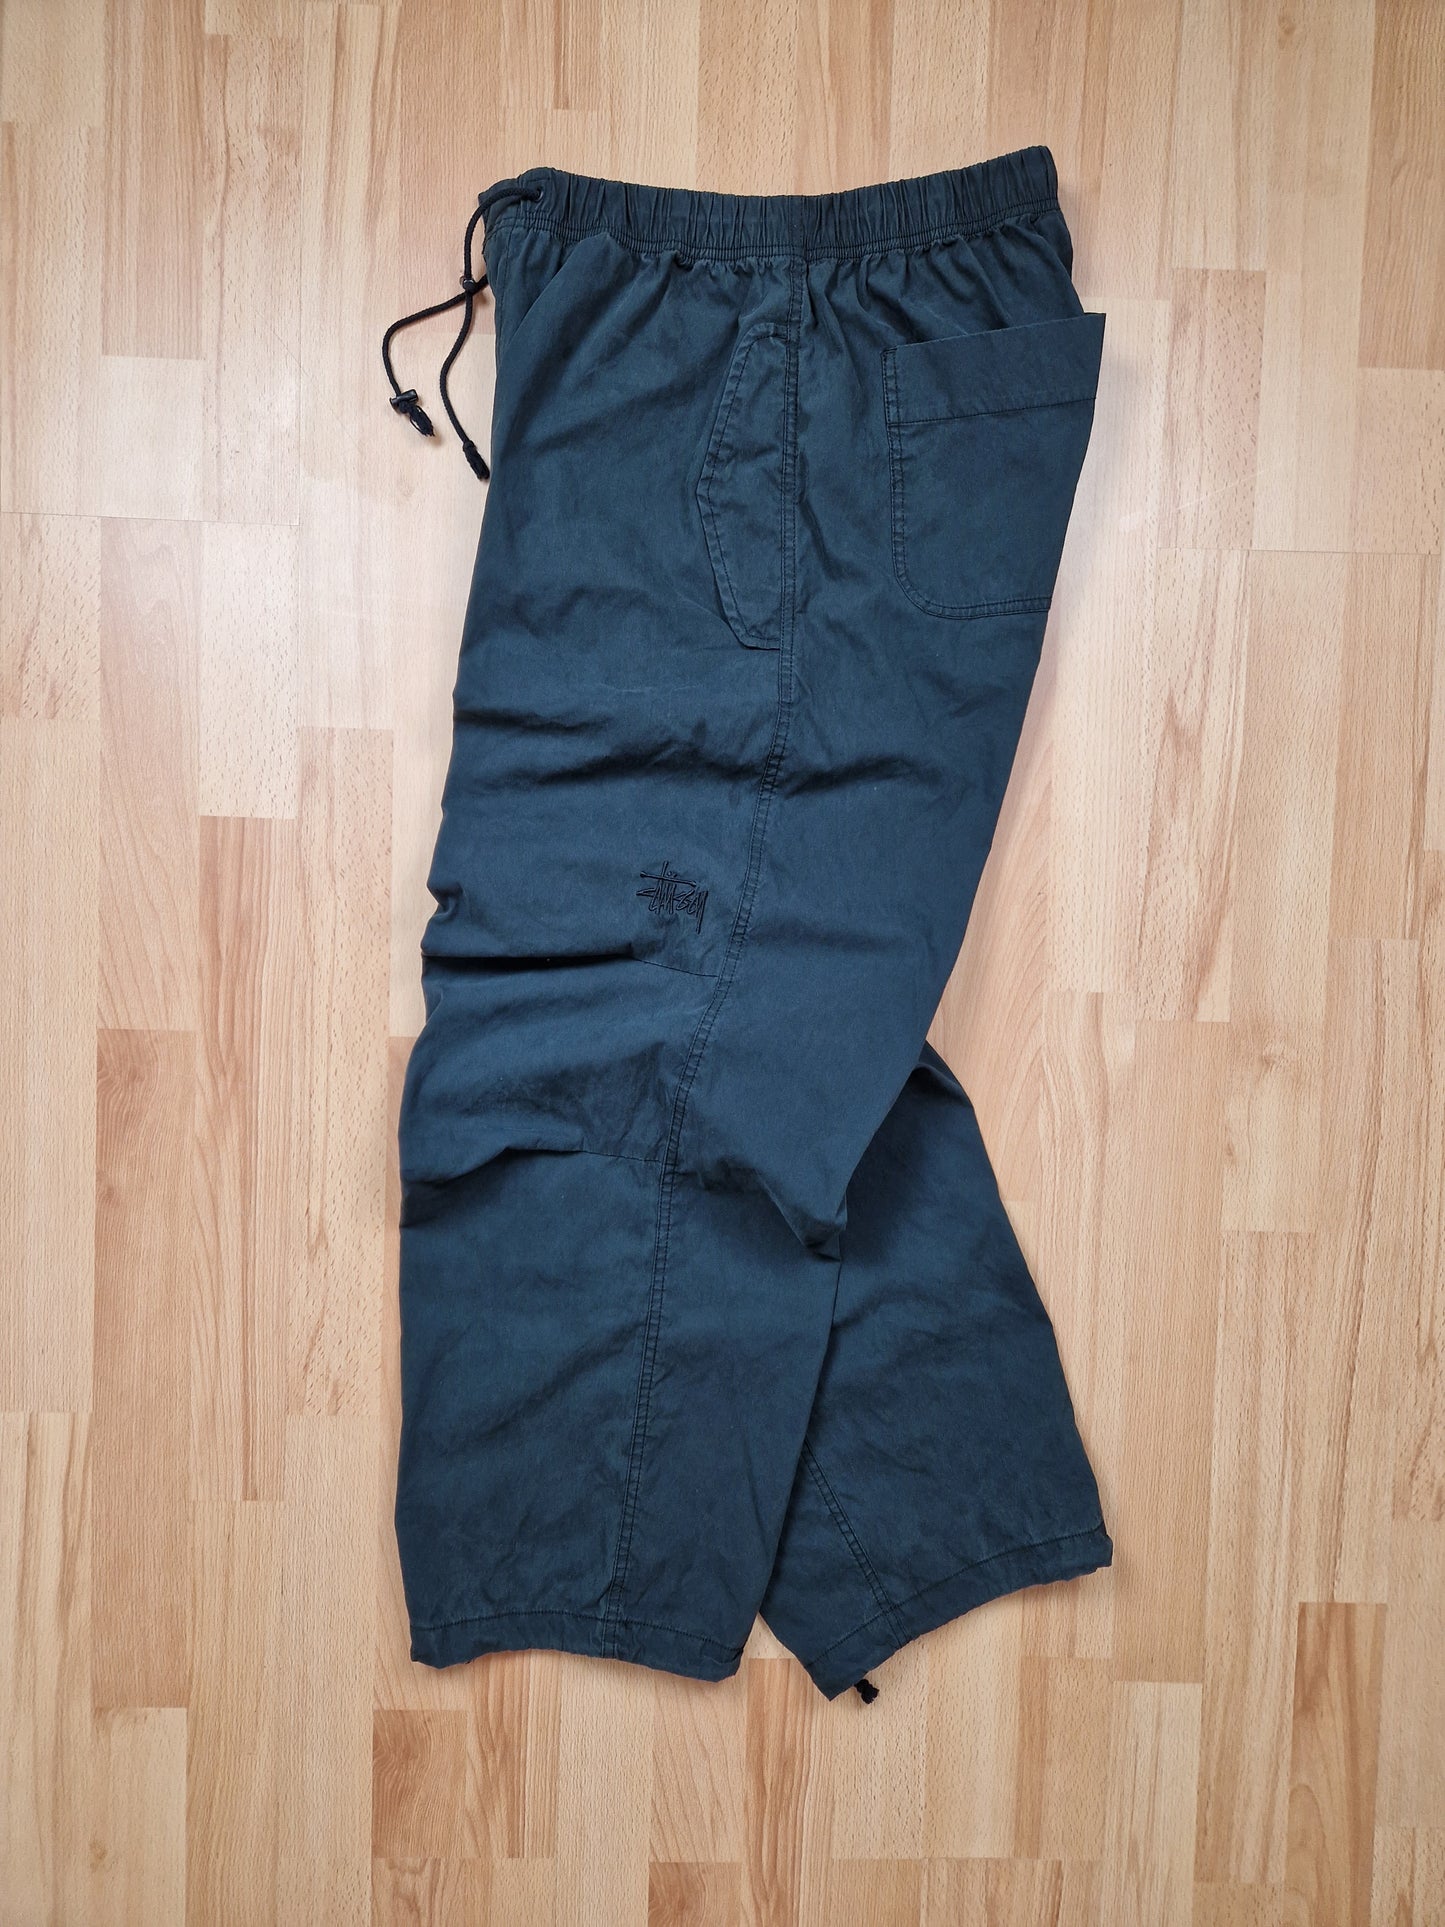 Stussy NYCO Over Trousers/Pants (M)